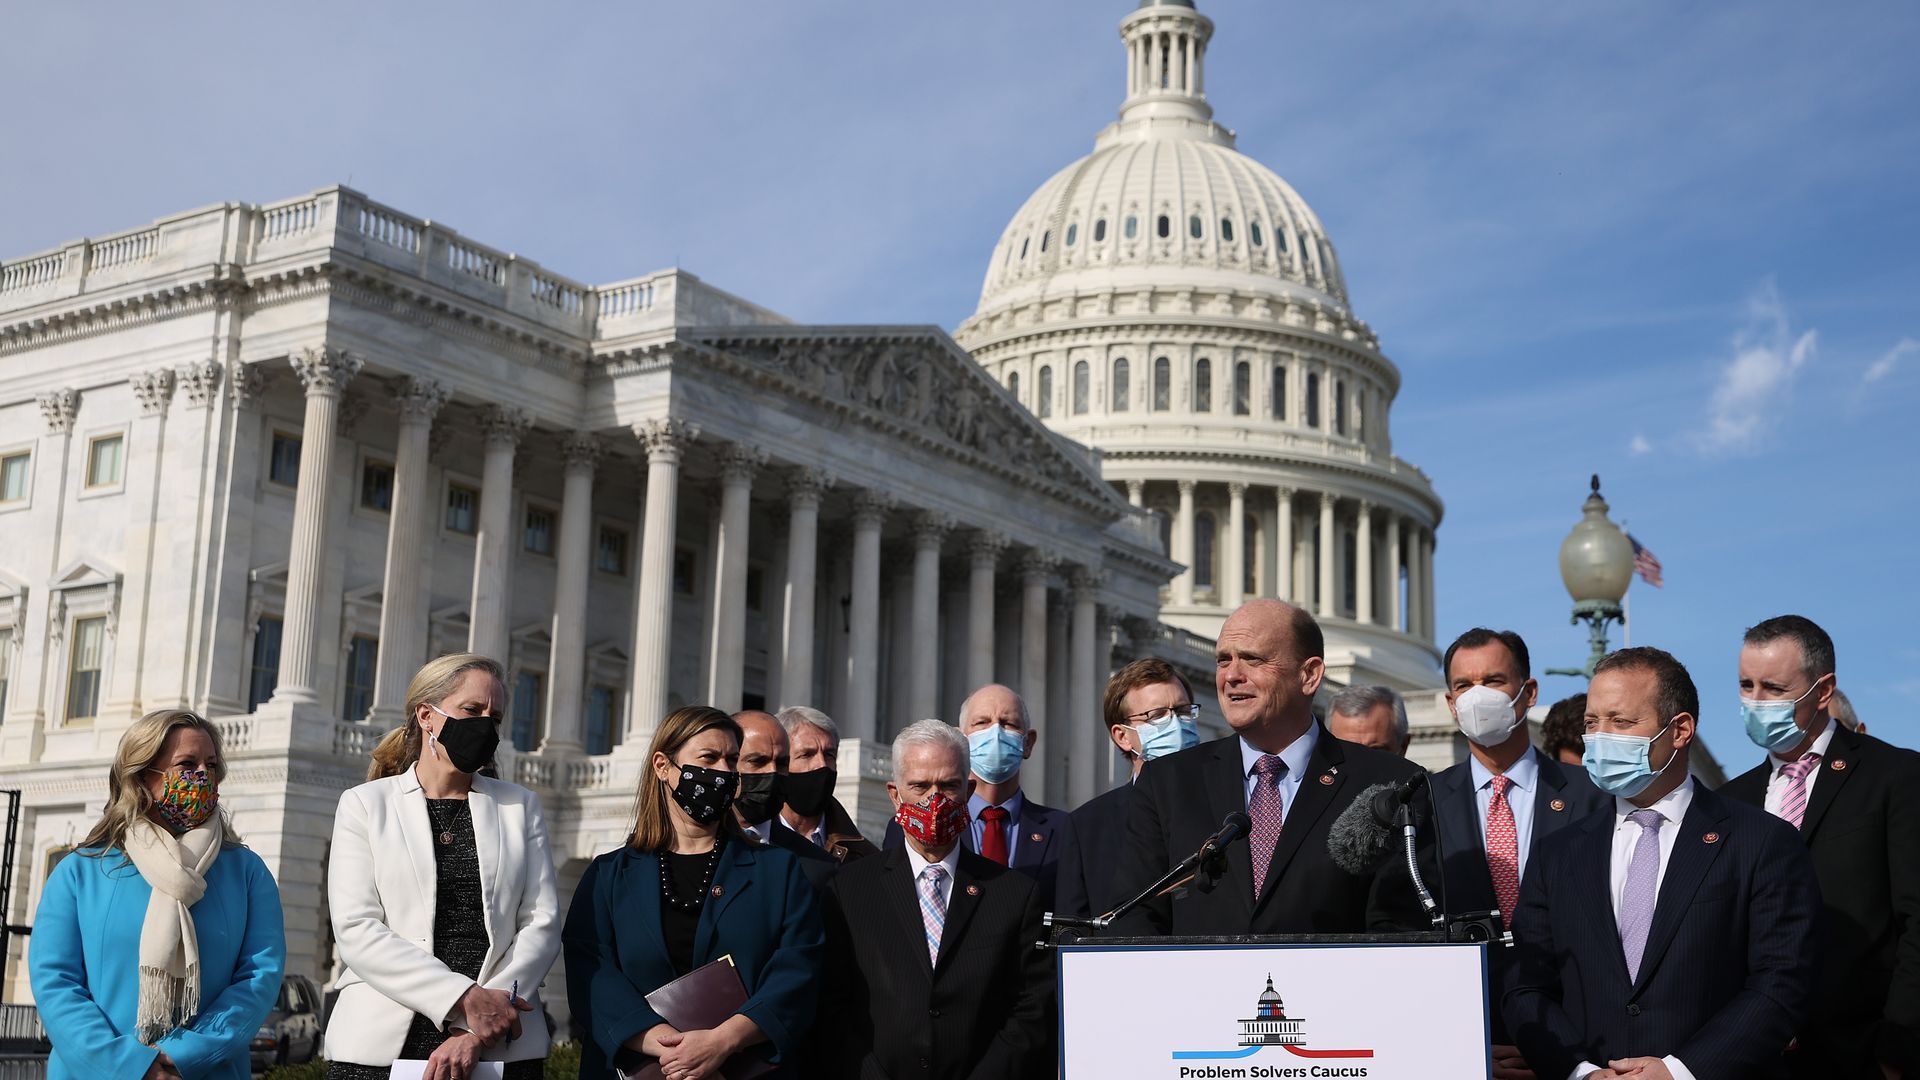 Reps. Tom Reed and Rep. Josh Gottheimer  co-chairs of the bipartisan Problem Solvers Caucus, hold a news conference with fellow members of Congress in December in Washington, DC.